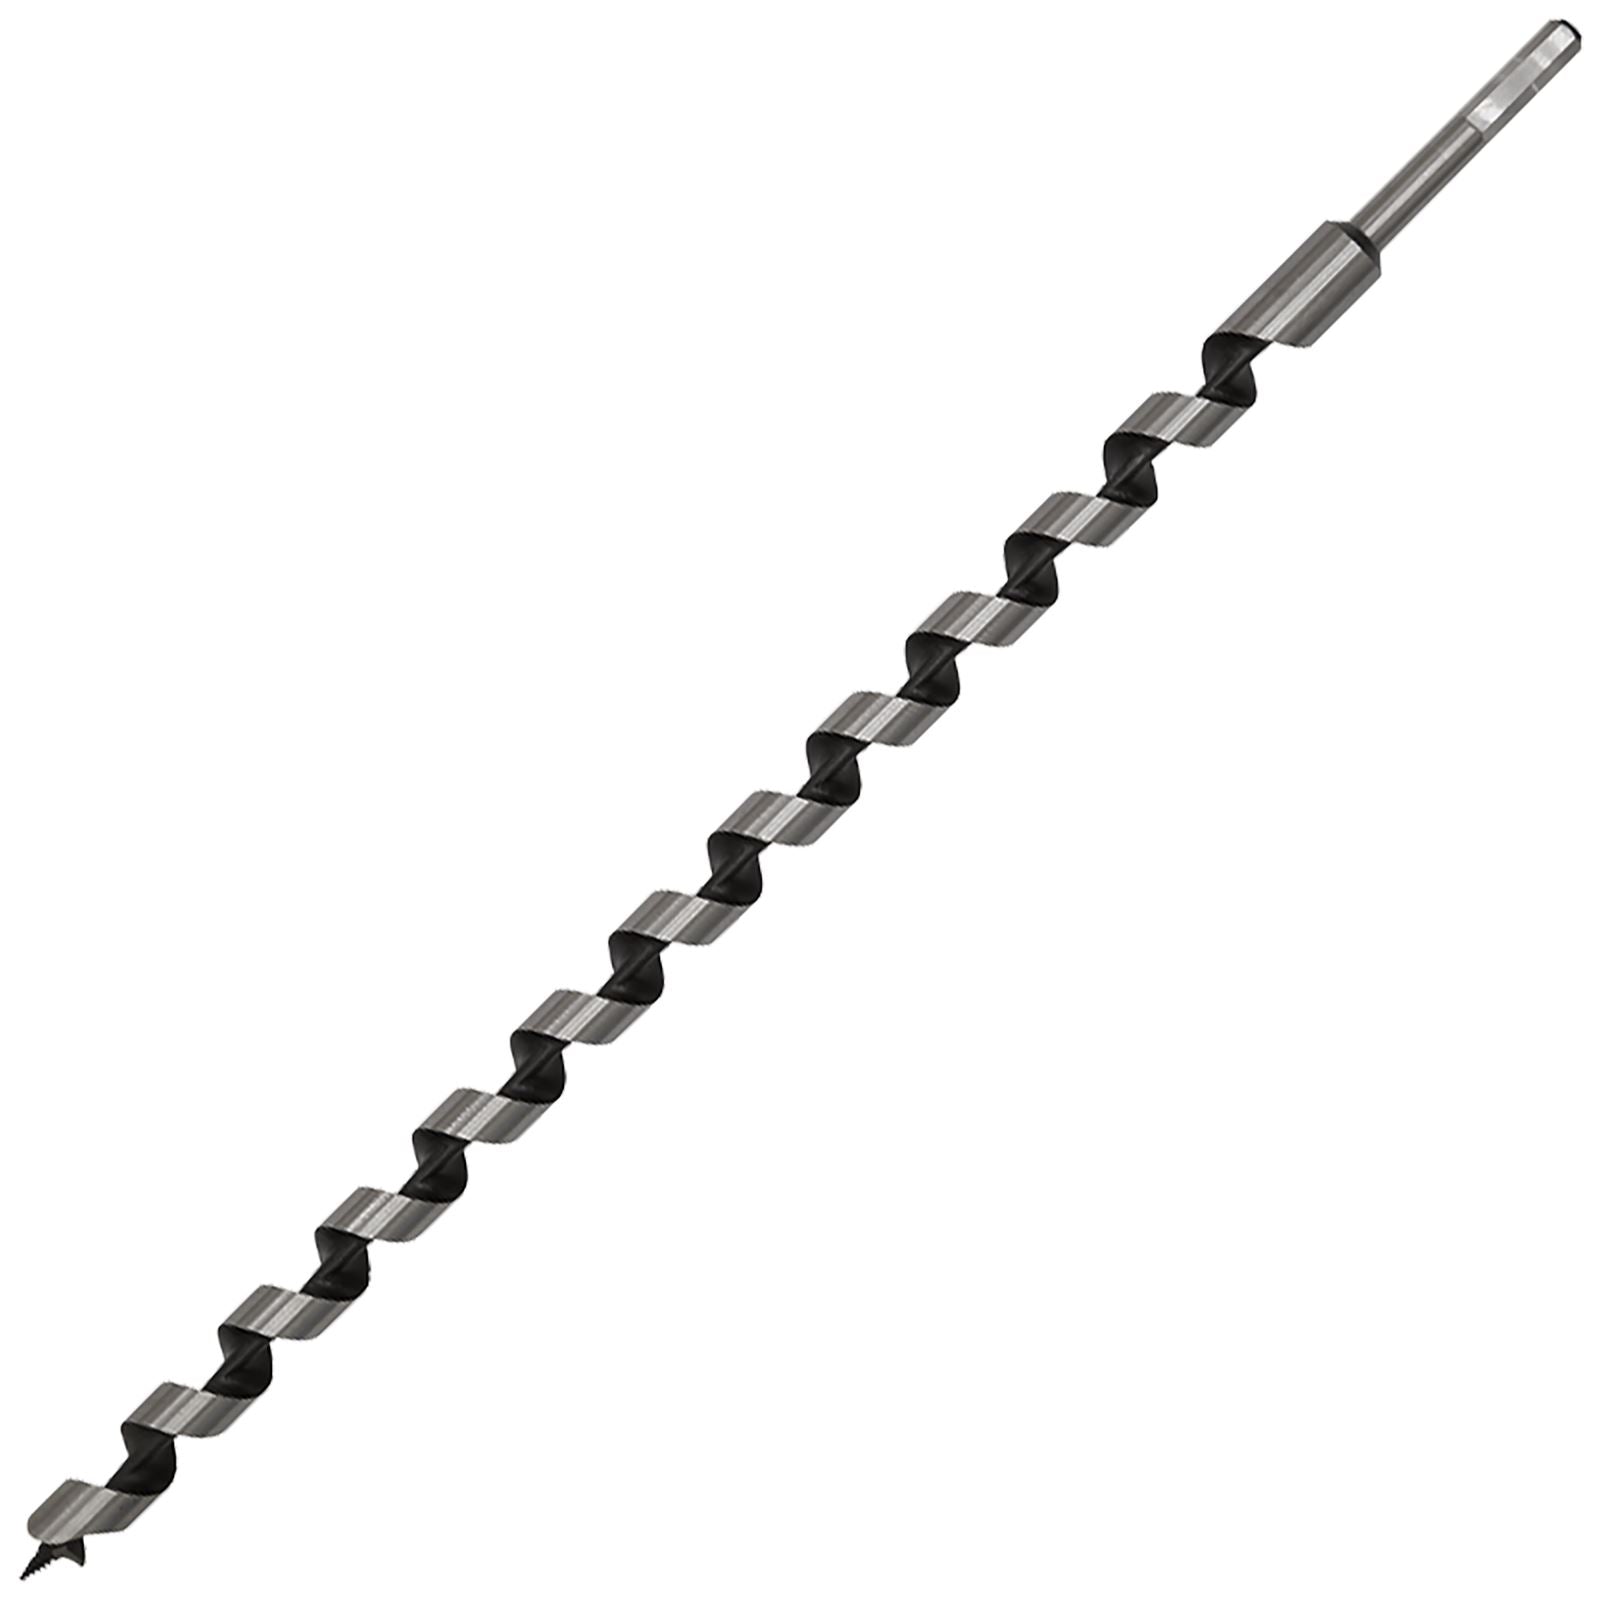 Worksafe by Sealey Auger Wood Drill Bit 22mm x 600mm